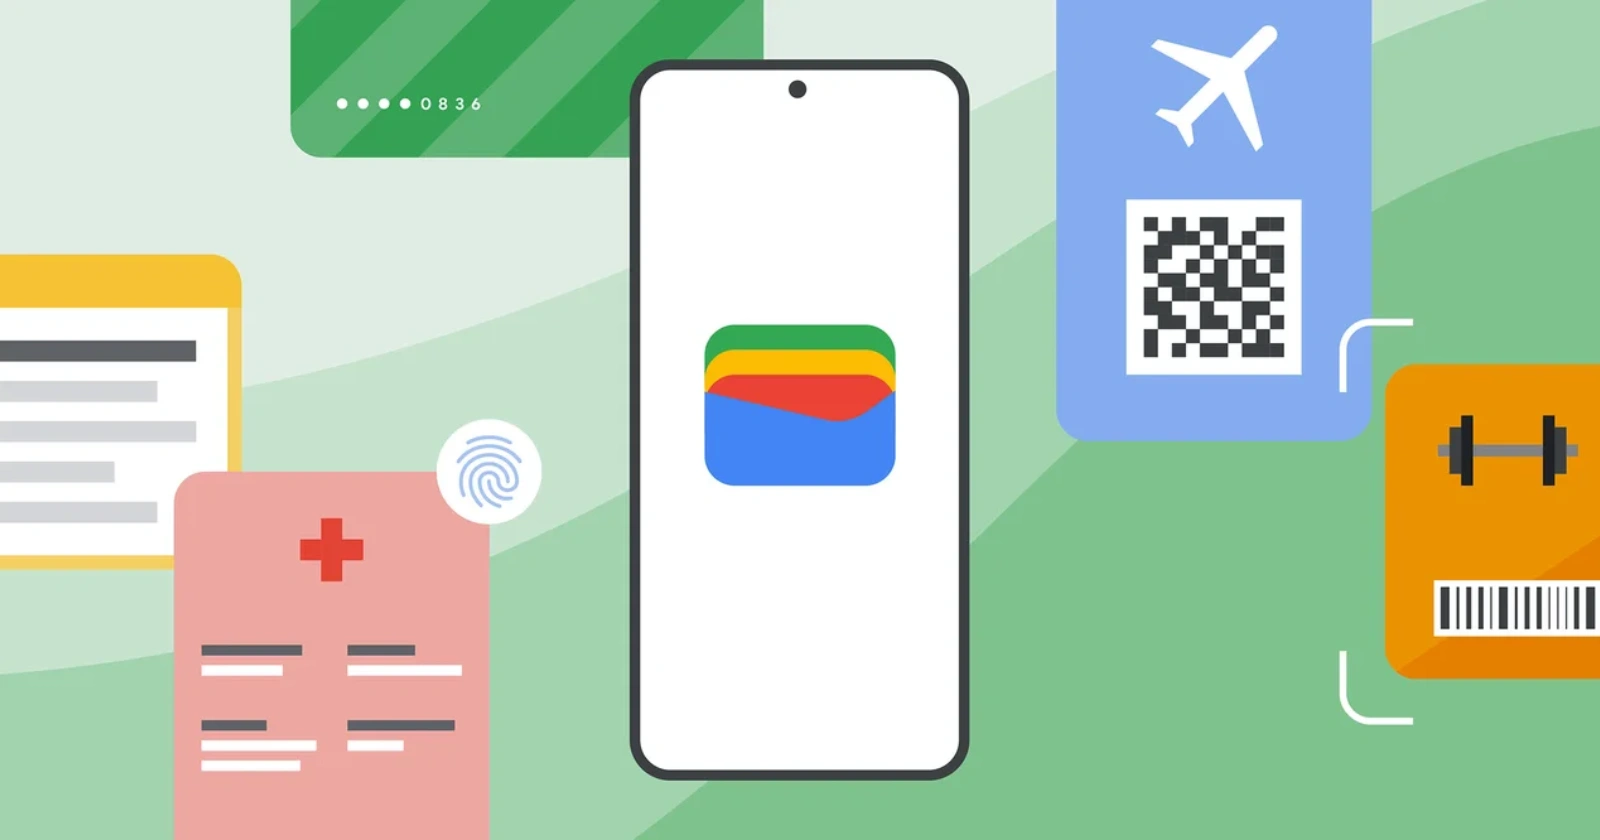 Google Wallet will now show boarding passes and movie tickets from your Gmail